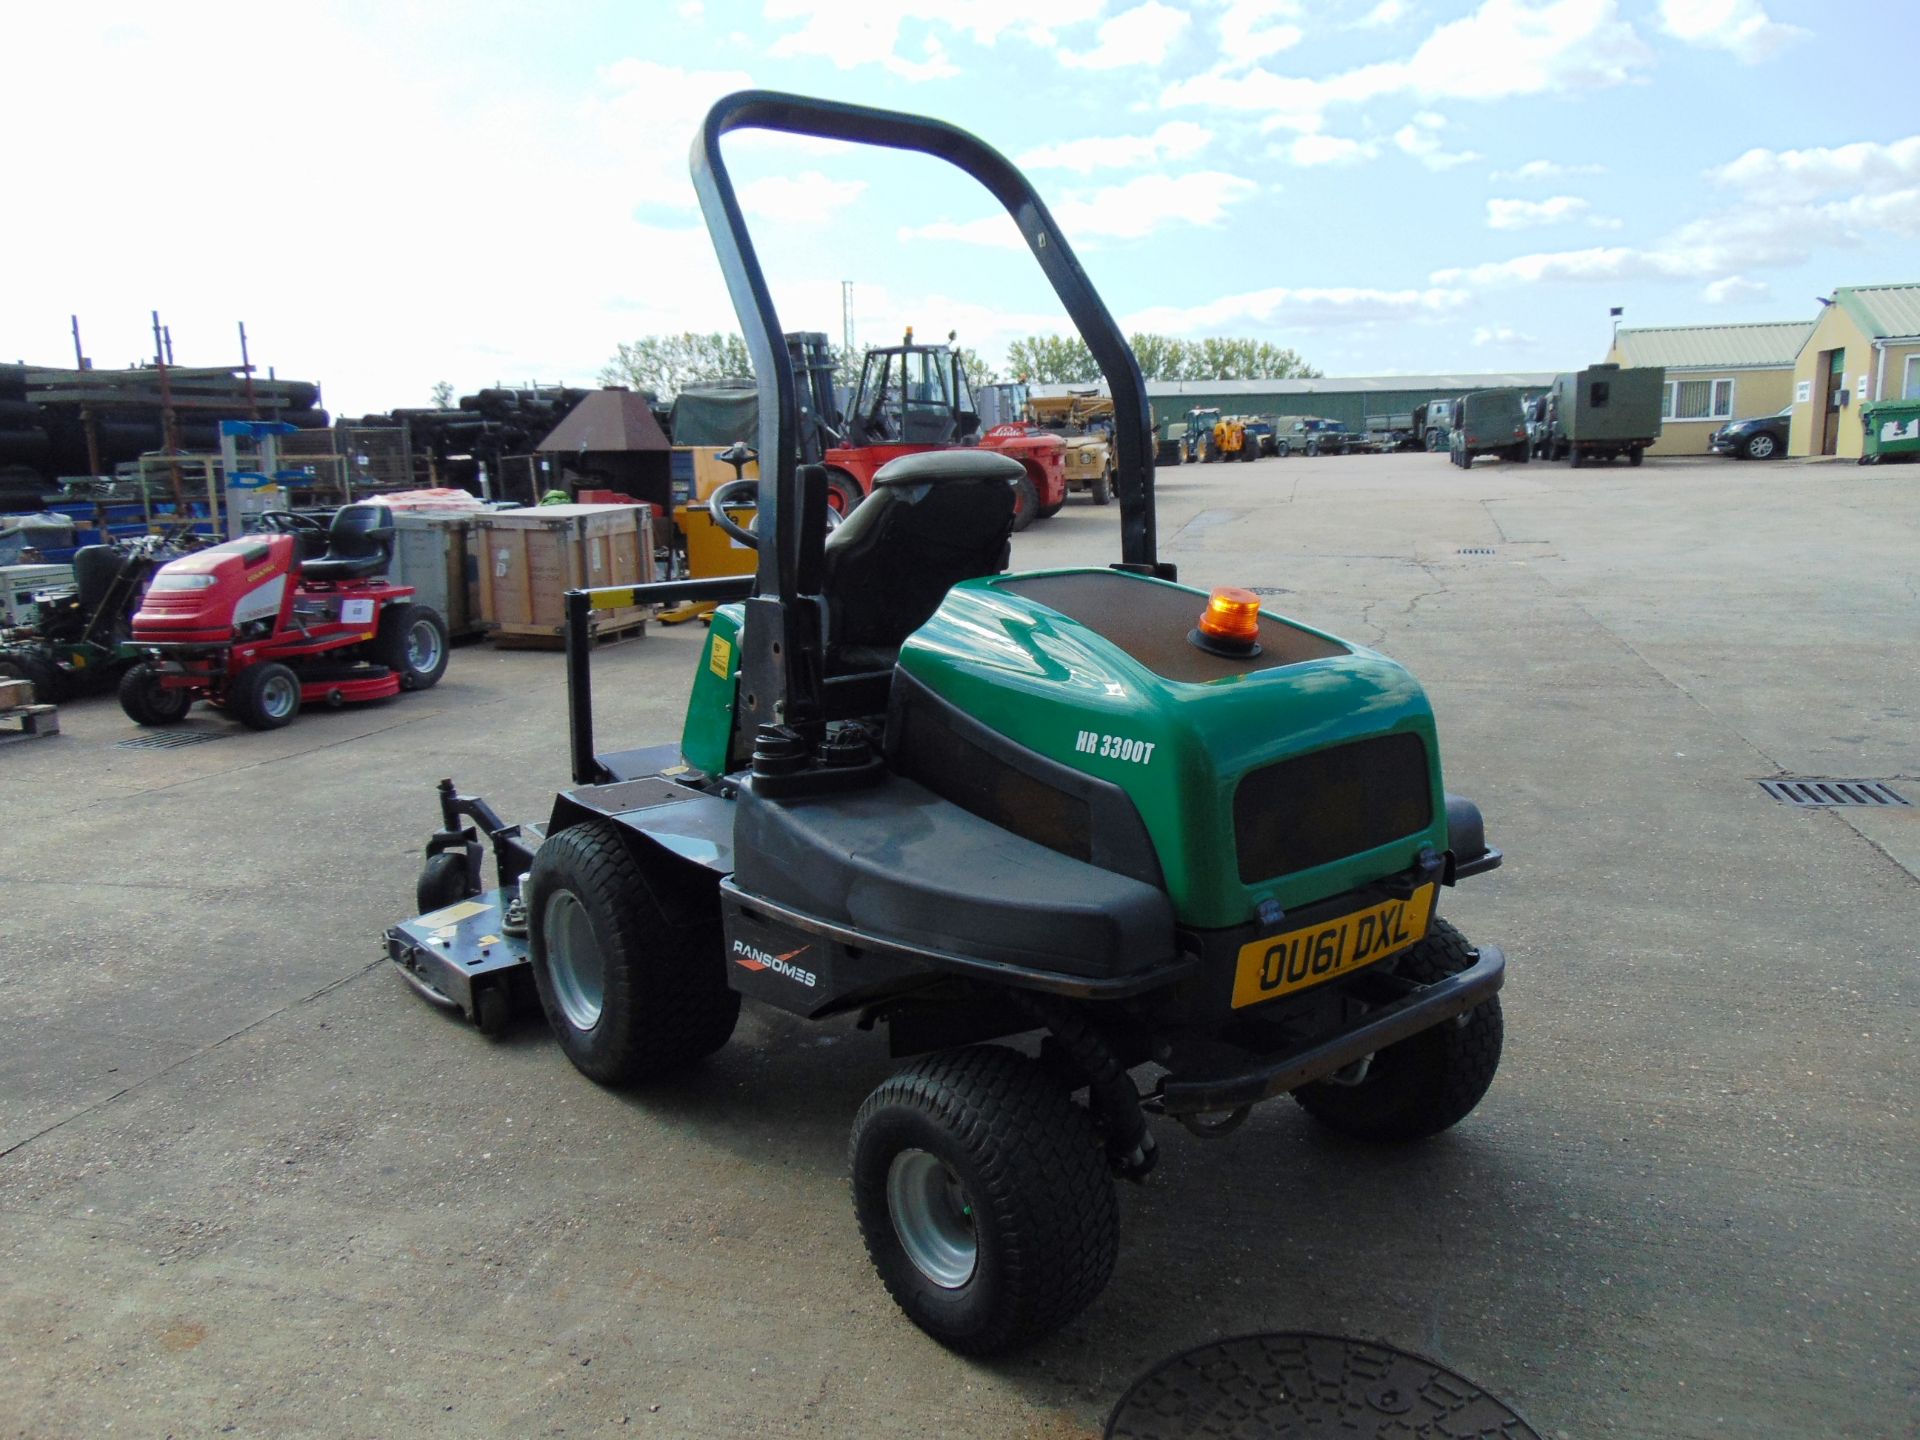 2012 Ransomes HR 3300T Outfront 3 Blade Hydraulic Rotary Mower. 4,560 hrs from UK Govt Contract. - Image 9 of 22